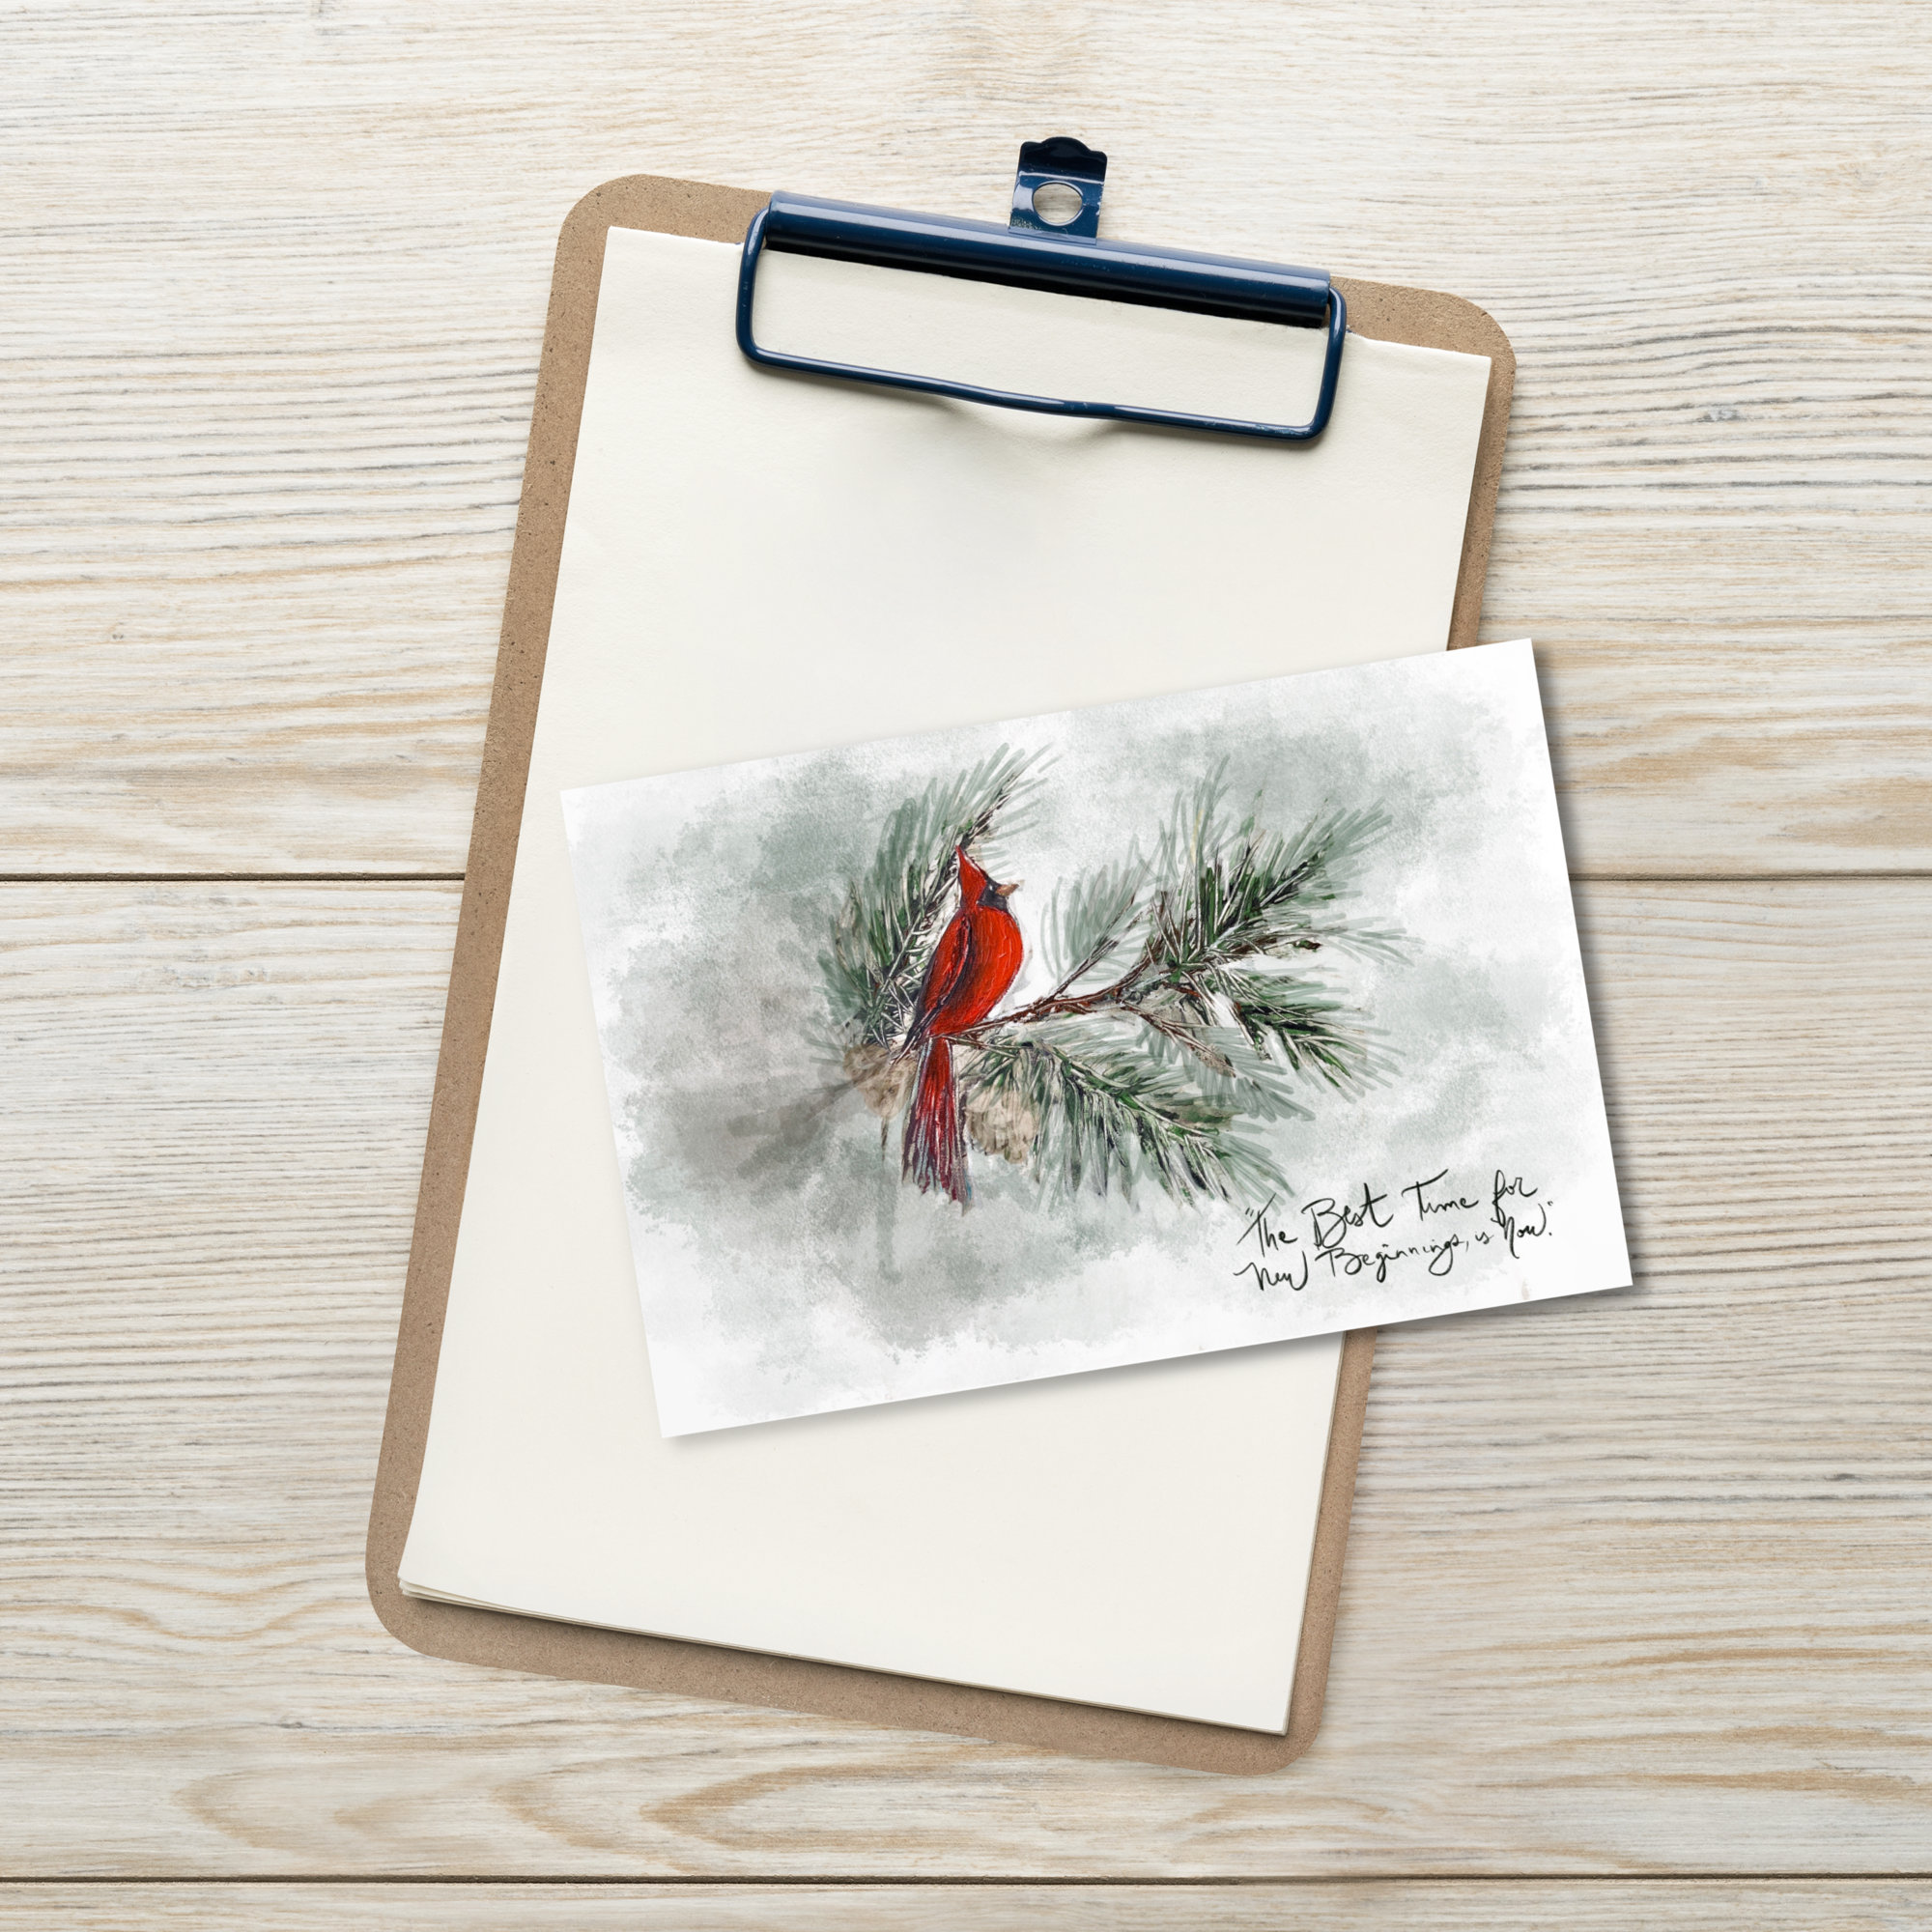 Cardinal Message"The Best time for New Beginnings,is Now." postcard by Rebeca Flott Arts